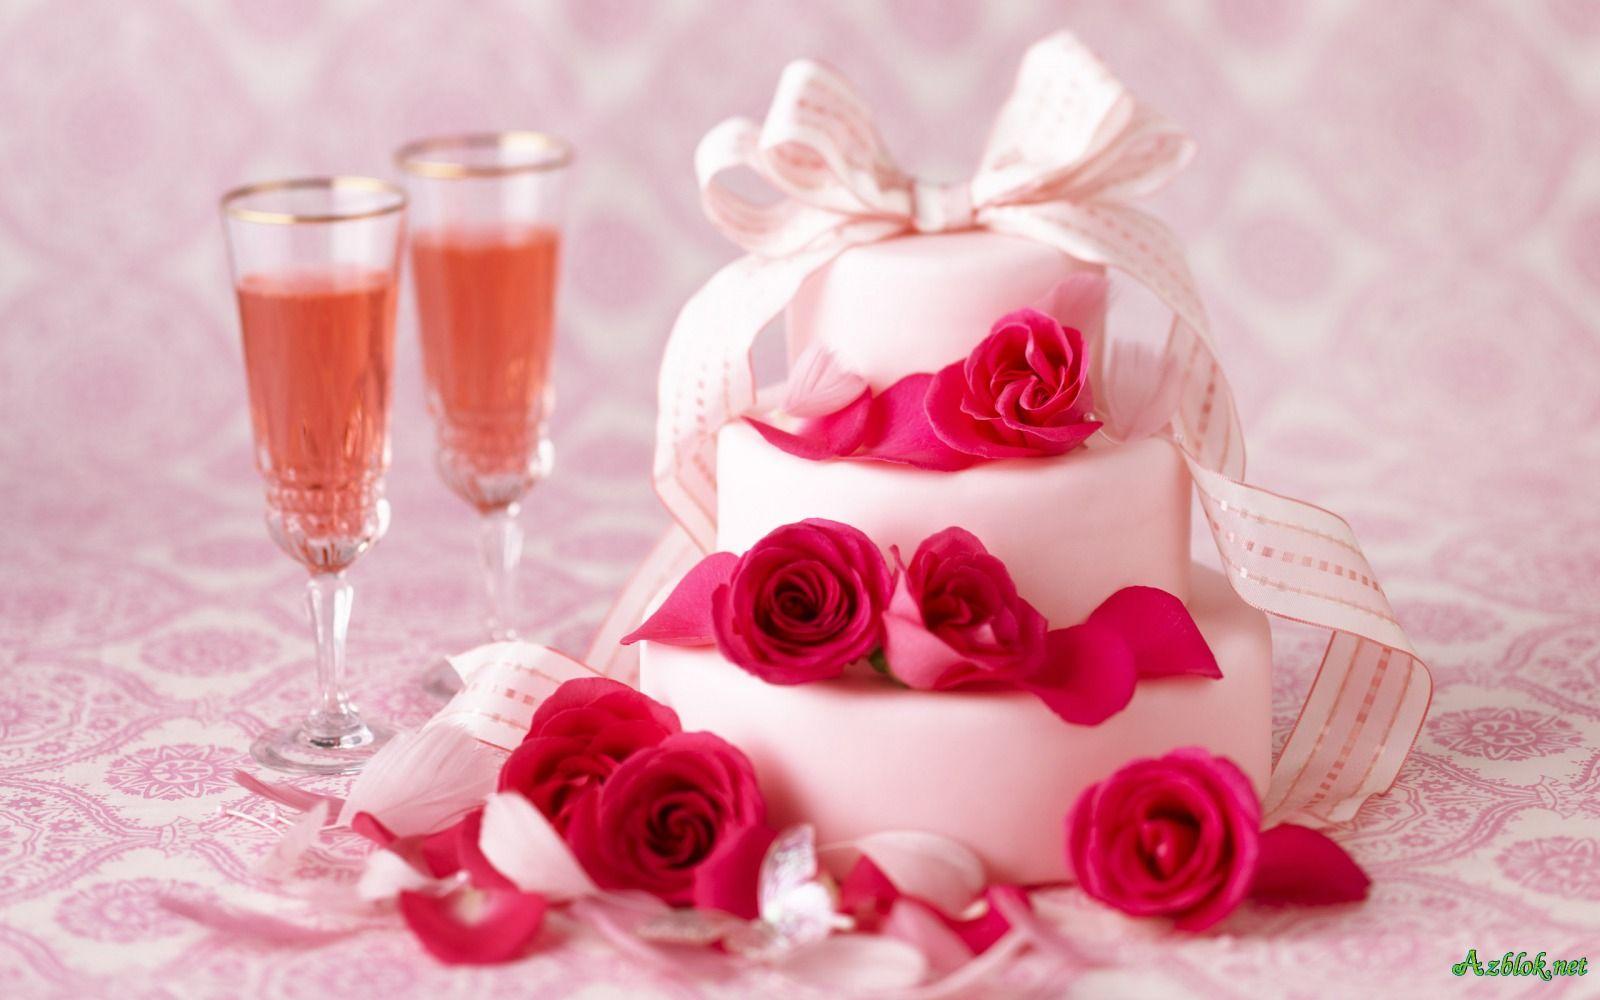 Download wallpaper: cake with rose and, download photo, wallpaper